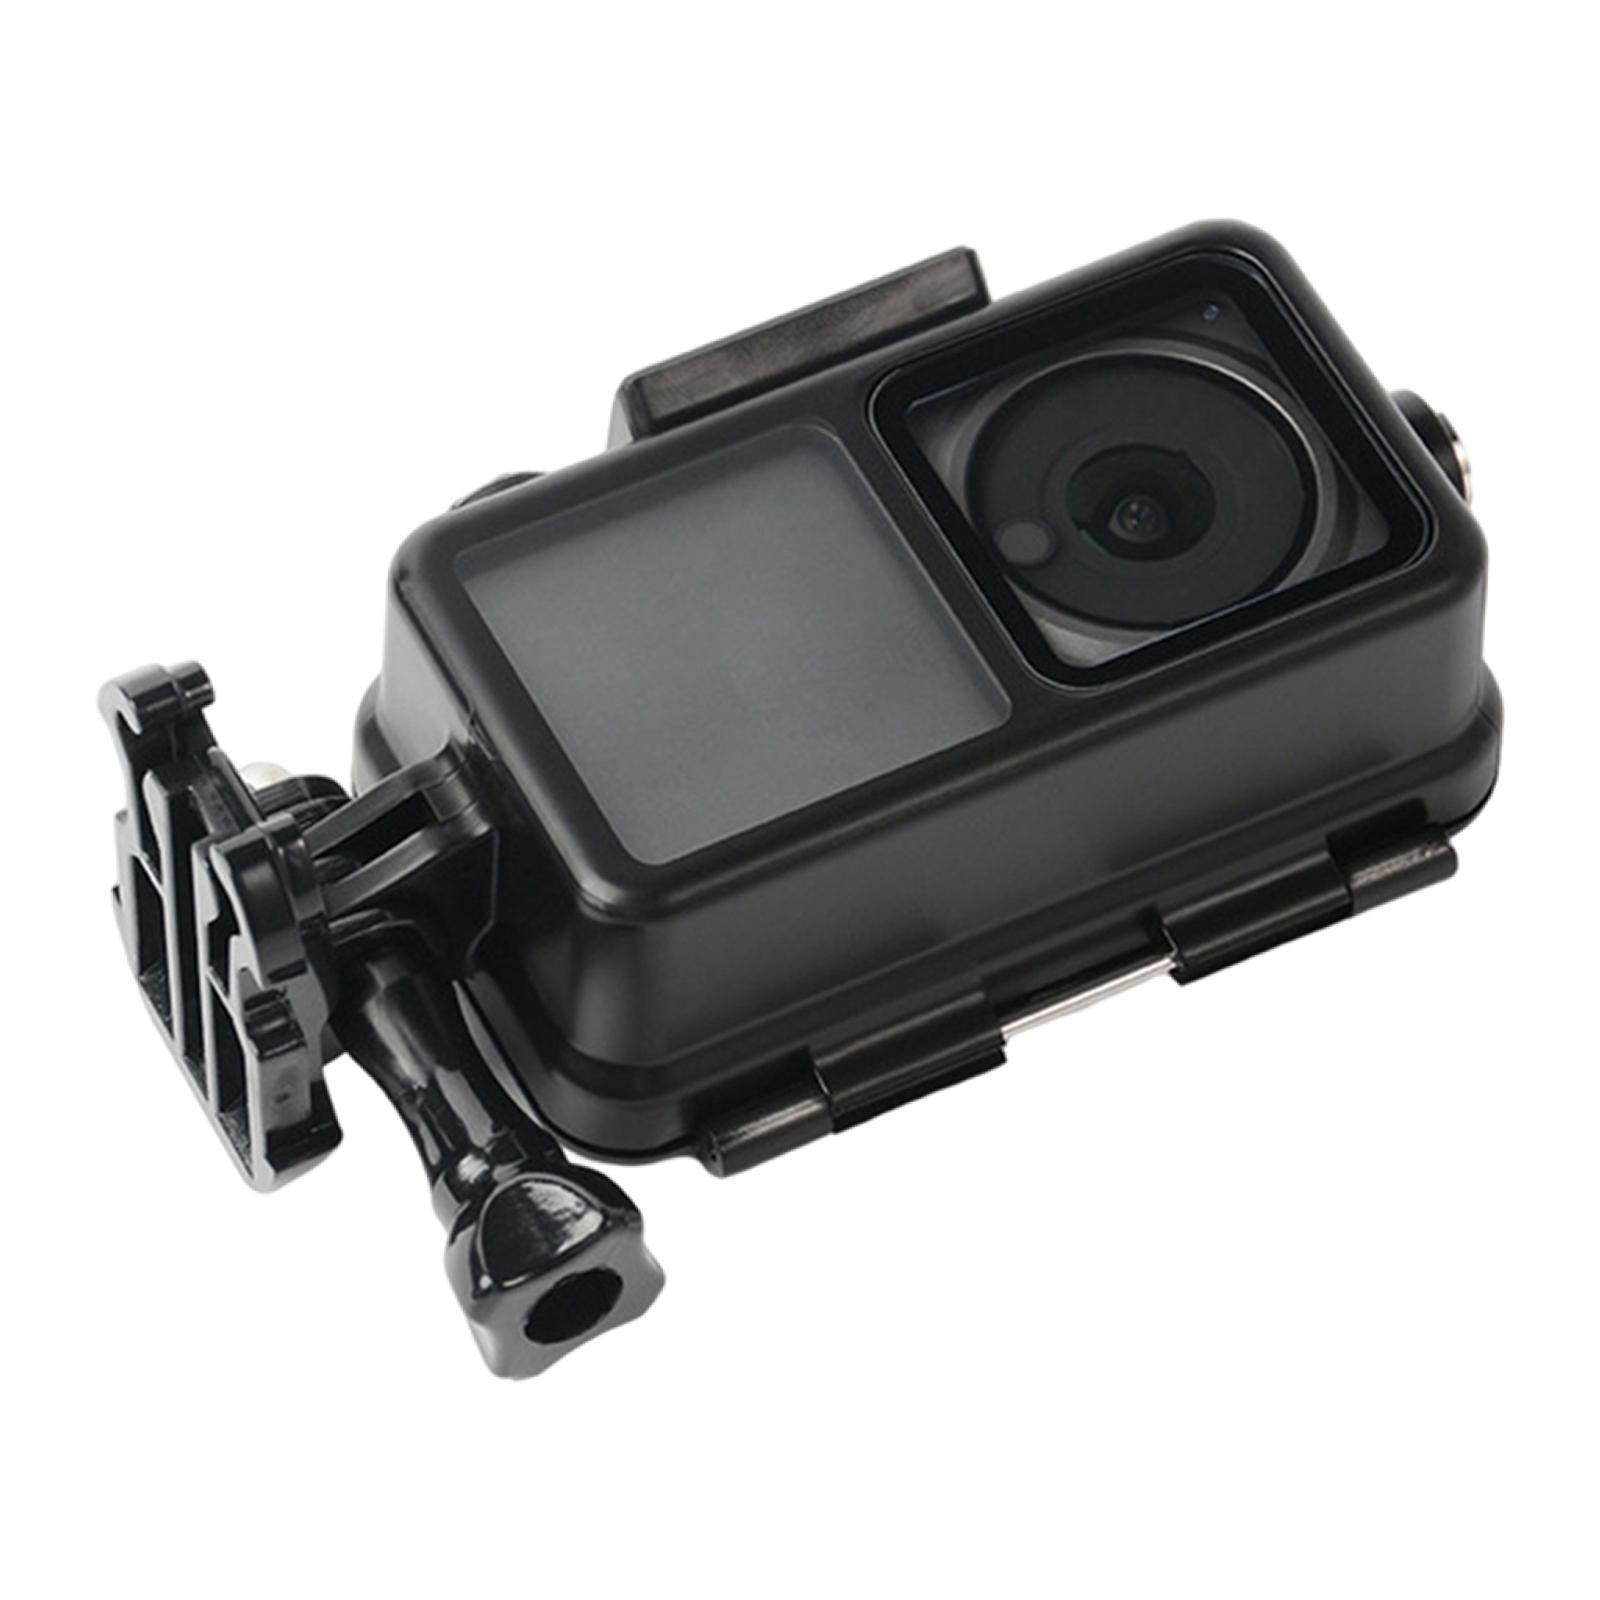 60M Waterproof Housing Case Shell ,Diving Housing Quick Release, with Tempered Lens Mount ,Underwater Case for DJI Action 2 Camera Accessories